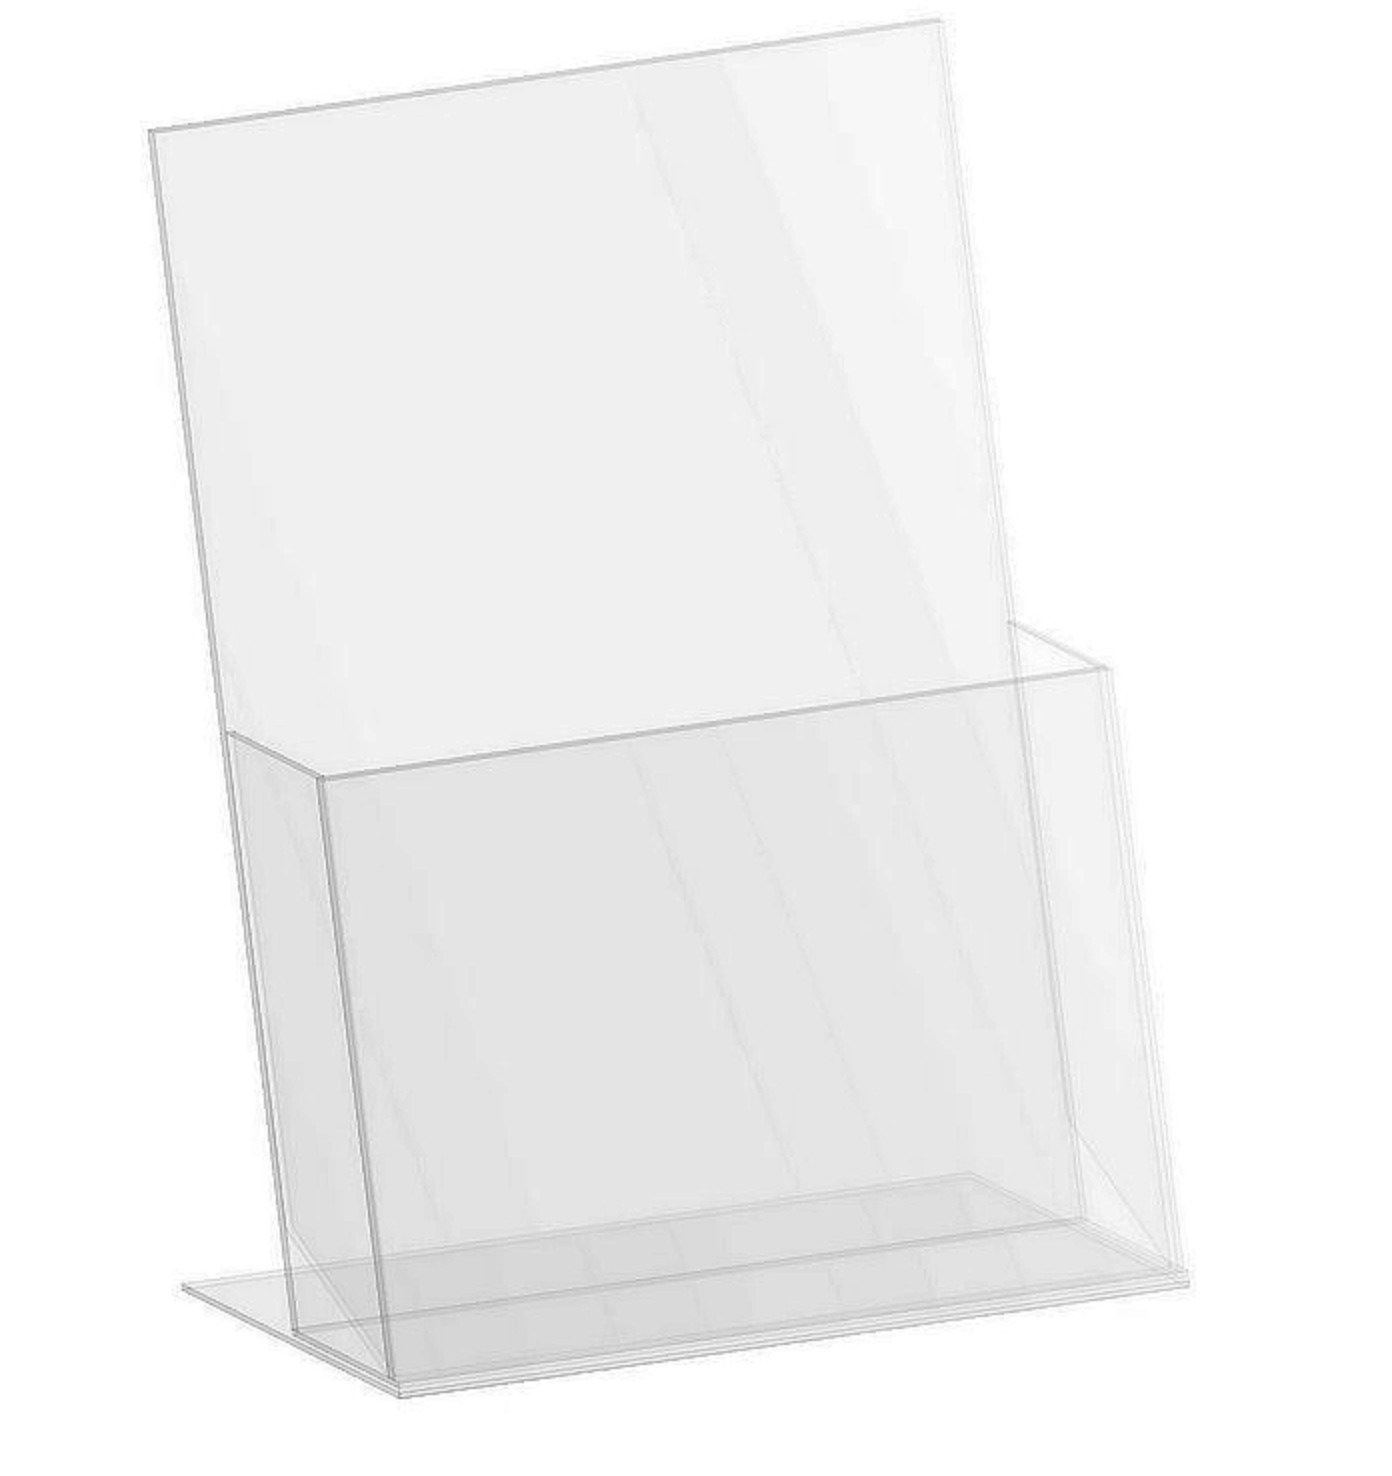 A5 Brochure holder stand